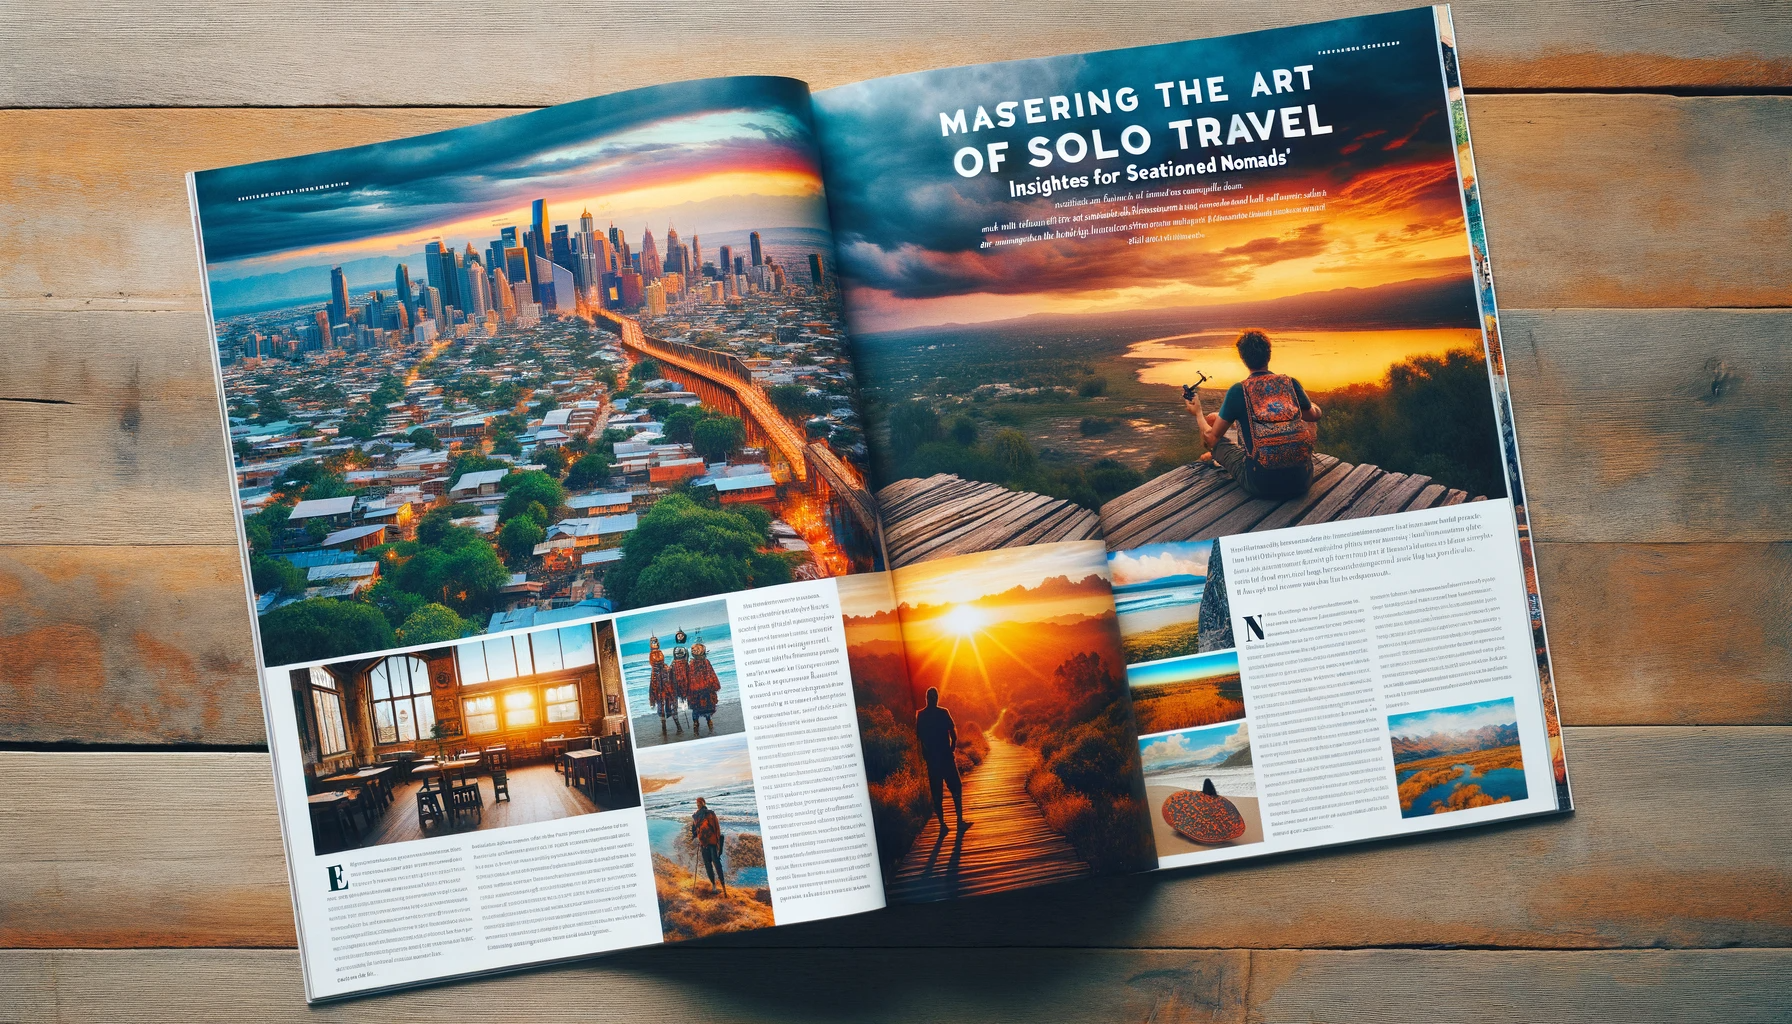 "Inside spread of Modern Nomad Magazine featuring solo travel tips and diverse travel photos."